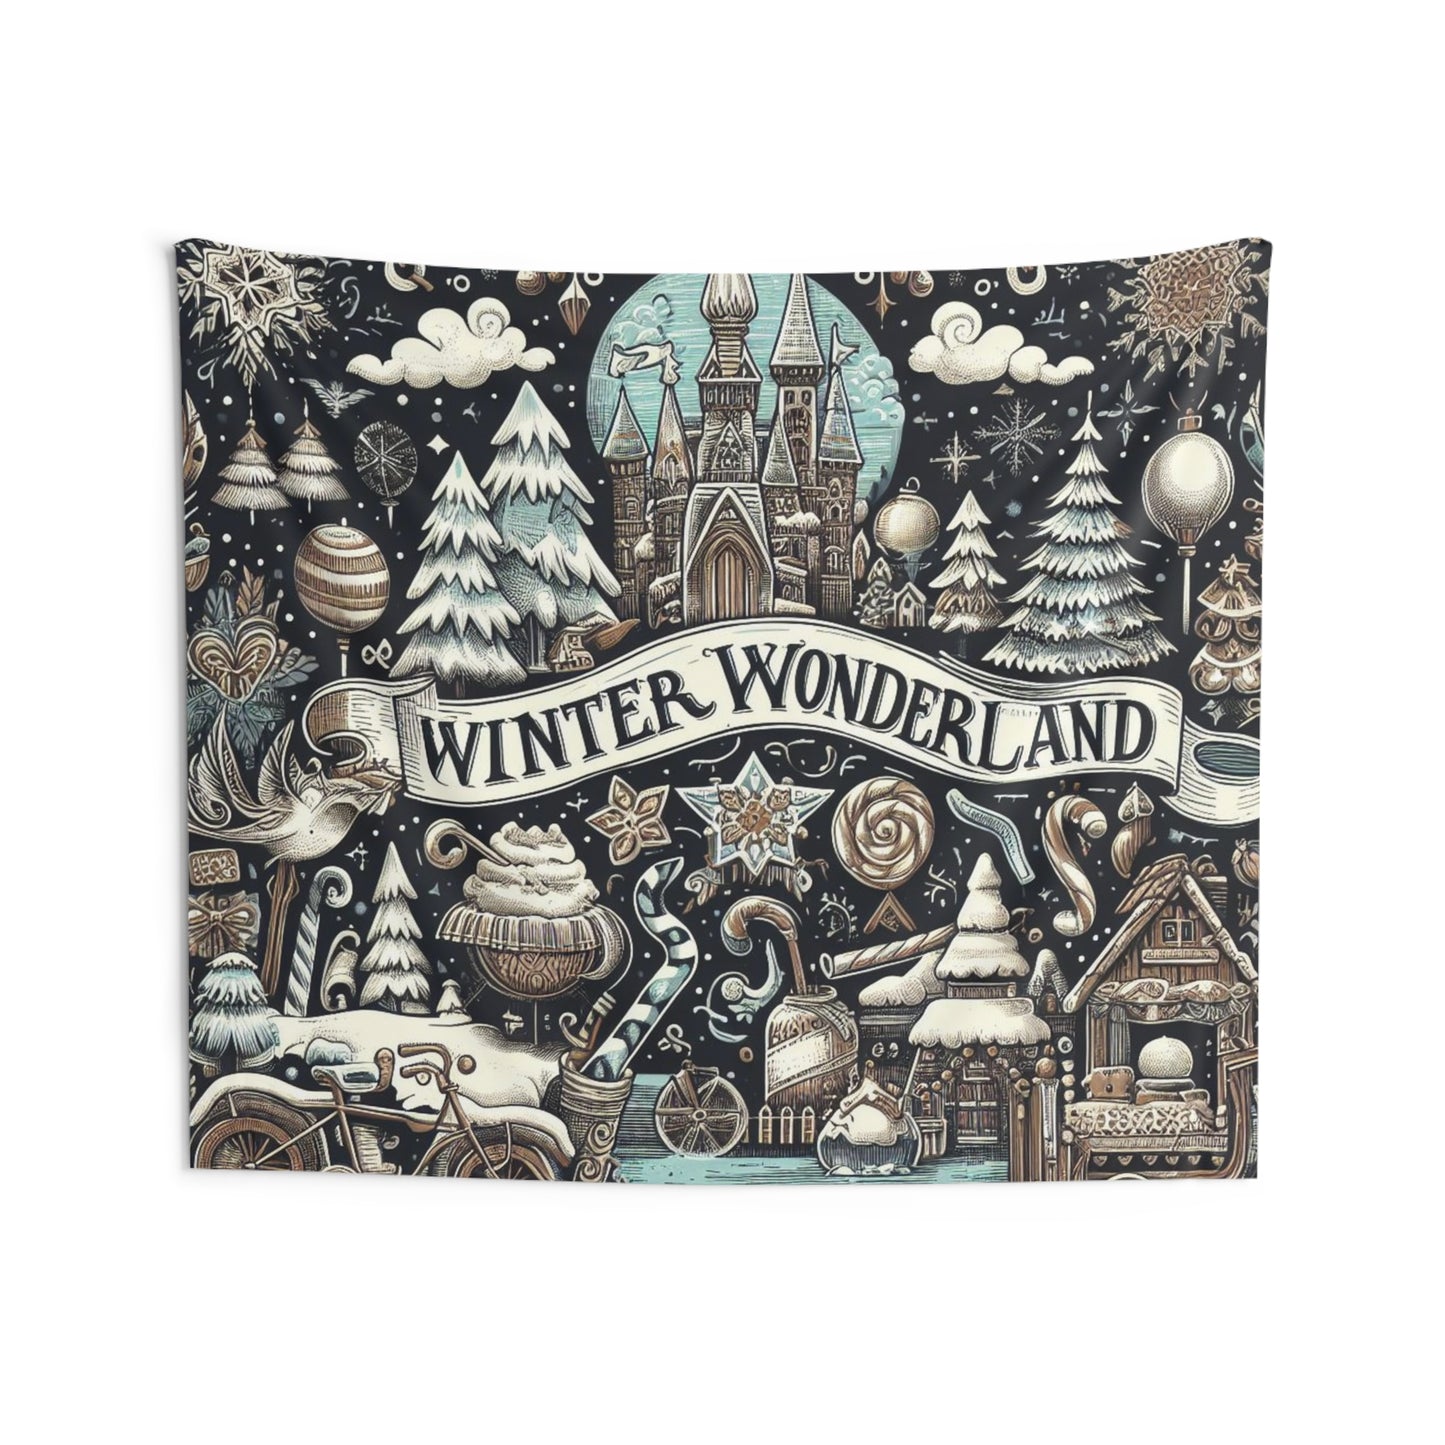 Winter Wonderland Enchantment: Nostalgic Christmas Snowscape with Majestic Castle and Festive - Indoor Wall Tapestries